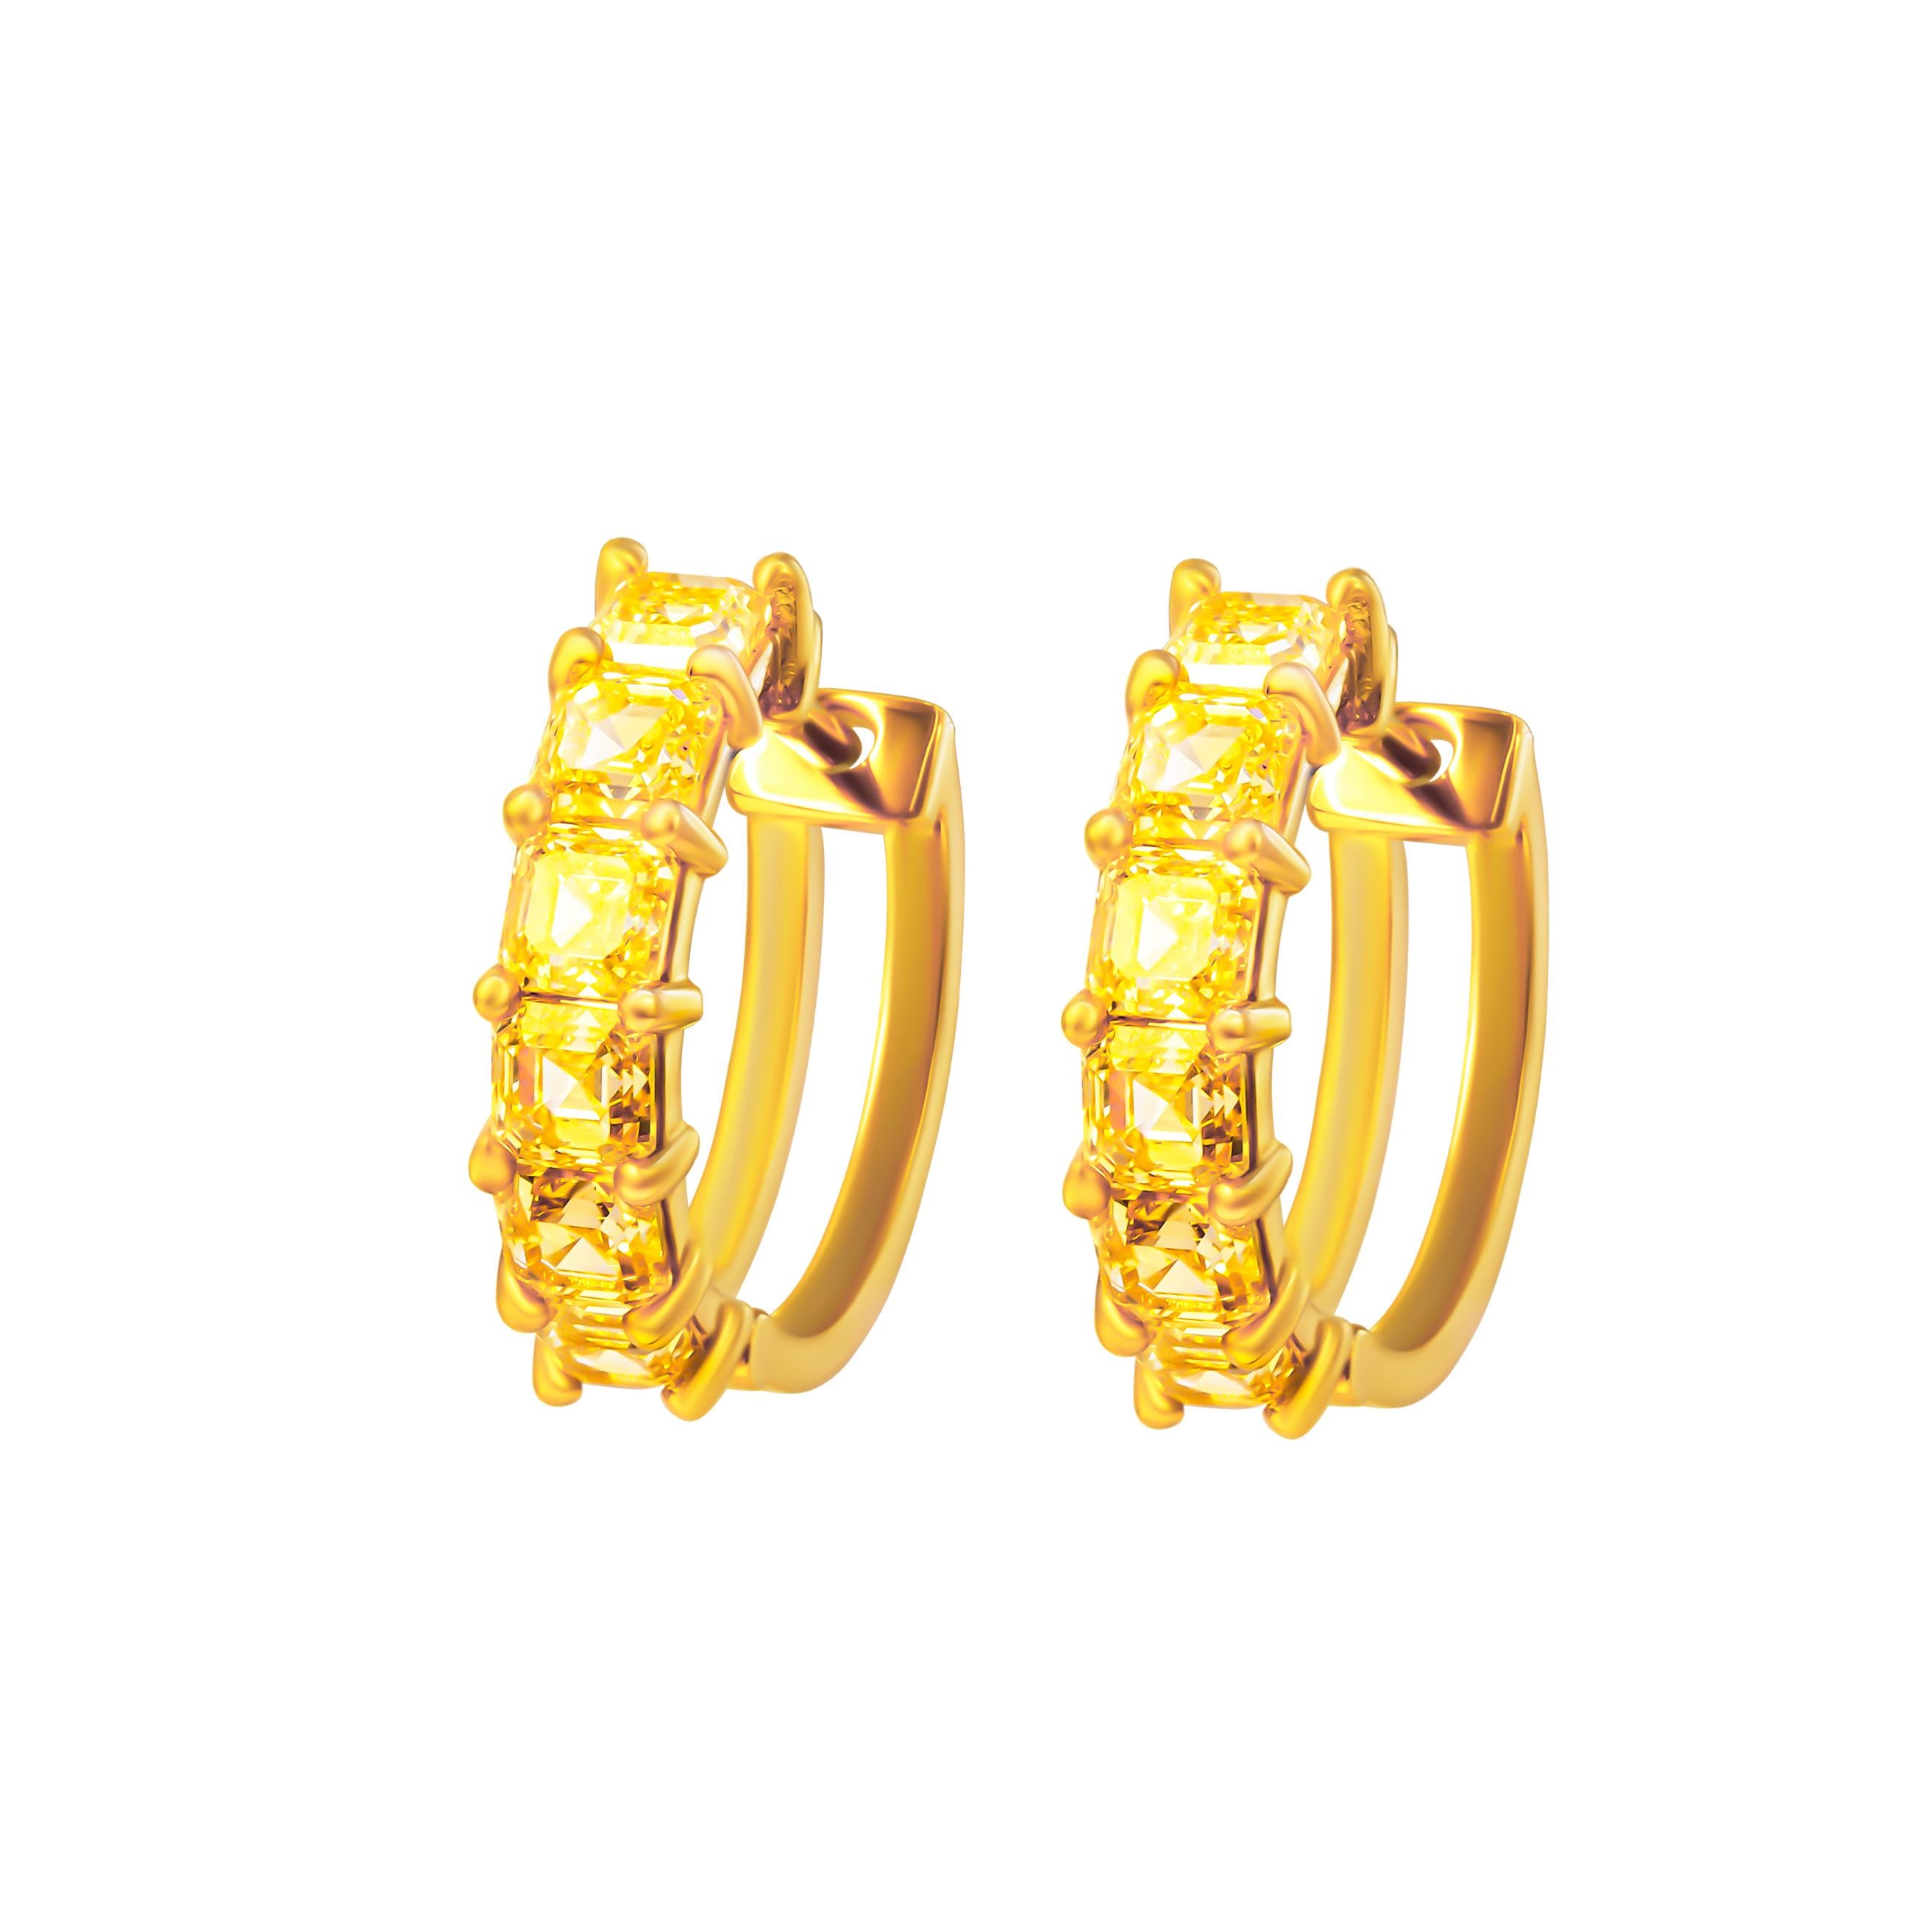 Elevate your style with our extraordinary Fancy Yellow Asscher-cut hoops earrings, crafted in luxurious 18K yellow gold. Each earring boasts a dazzling Asscher-cut diamond weighing 0.32 carats, totaling 3.78 carats collectively. Adorned with 12